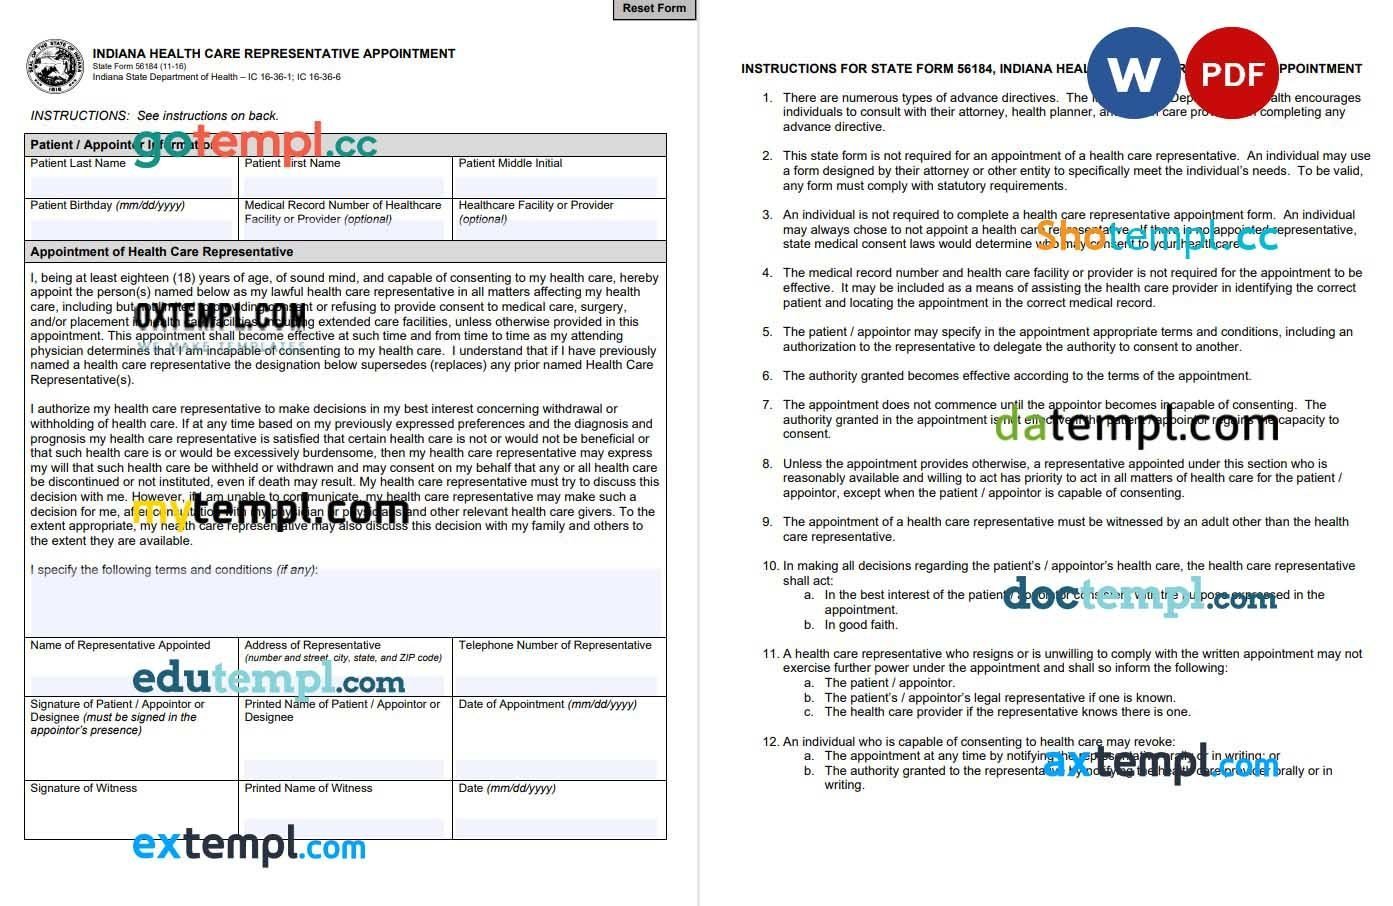 Indianna Health Care Representative Appointment Form example, fully editable